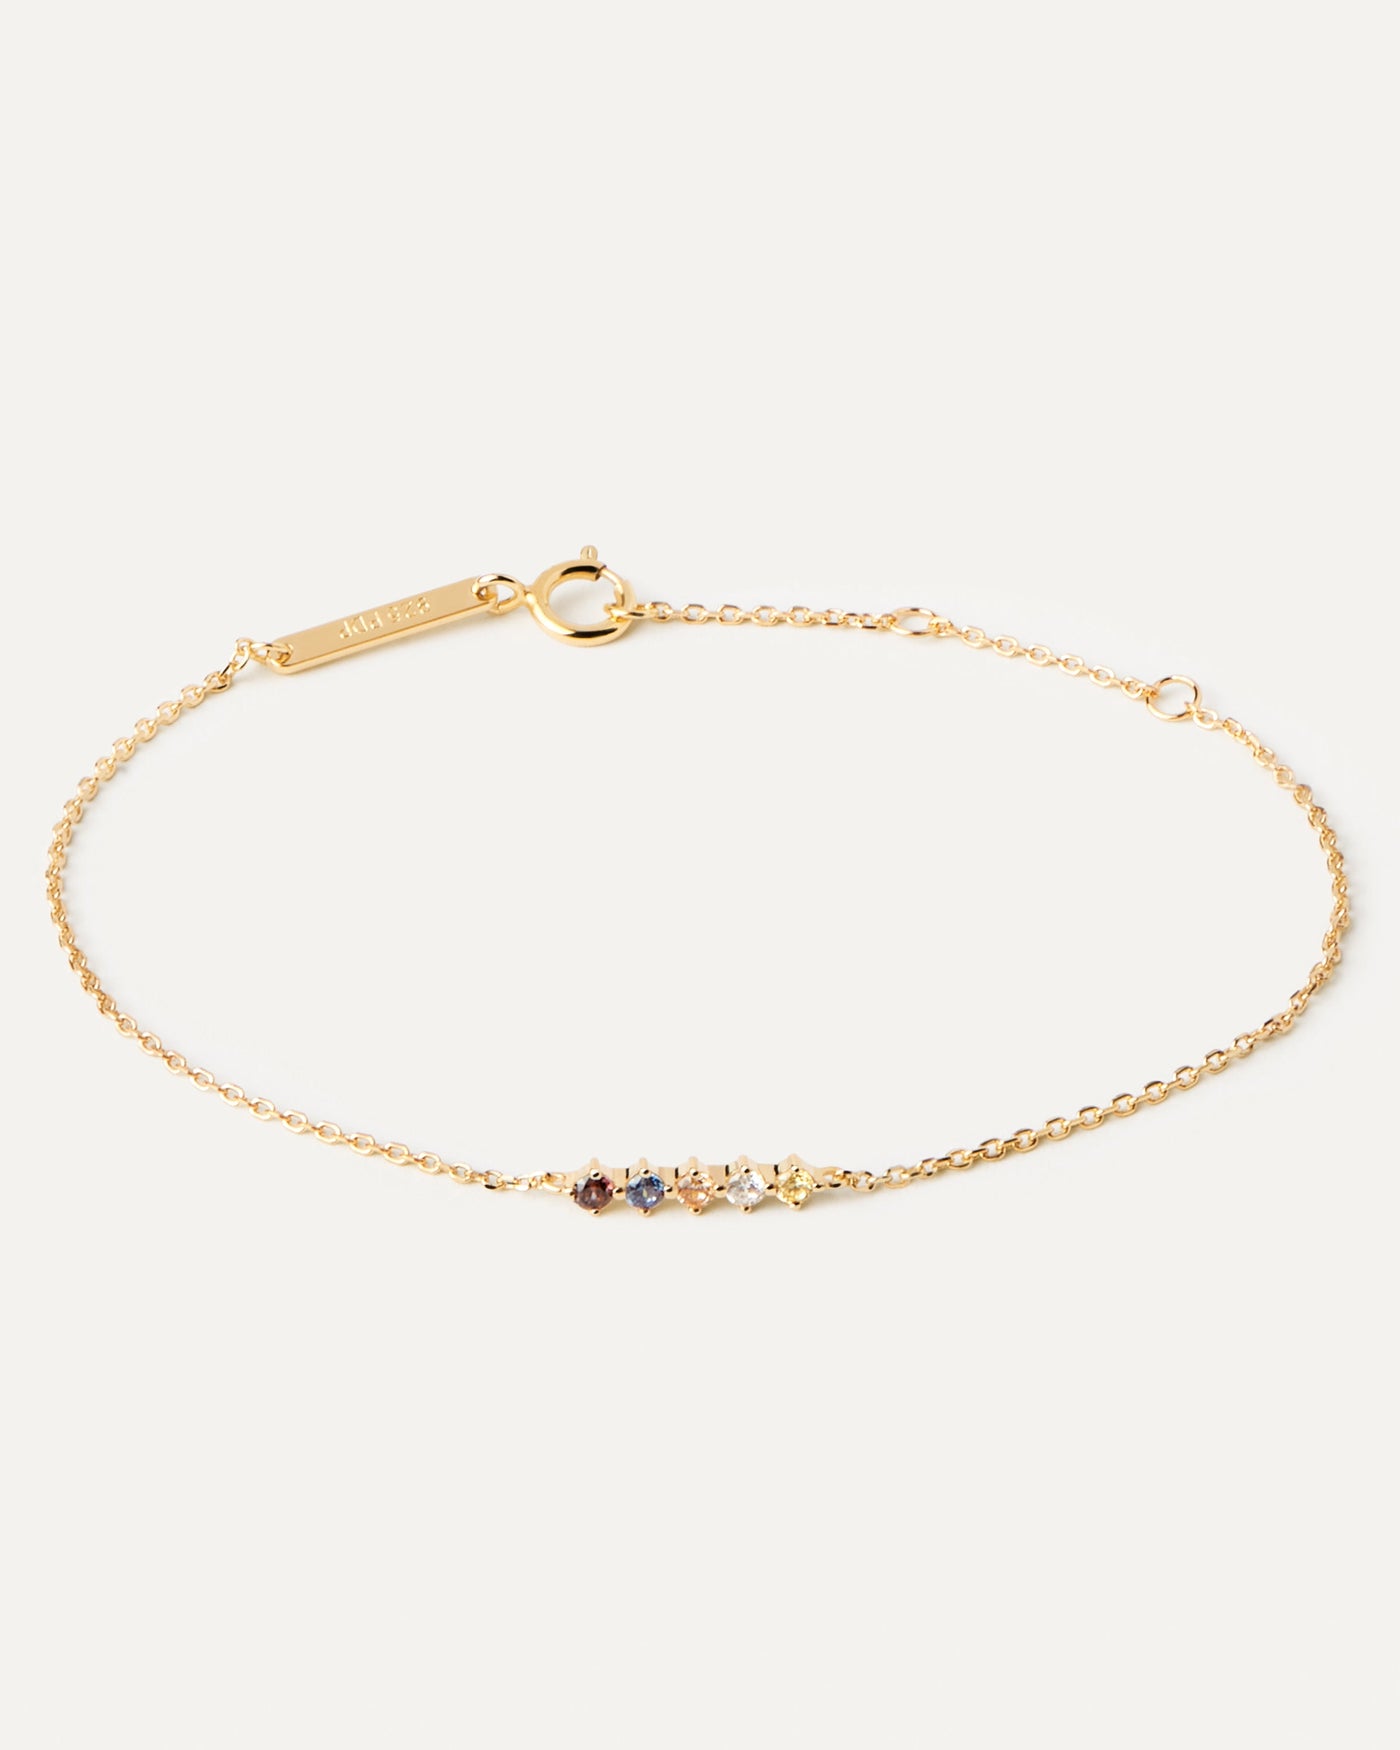 2024 Selection | Sage Bracelet. Gold-plated silver bracelet with dainty zirconia of five different colors. Get the latest arrival from PDPAOLA. Place your order safely and get this Best Seller. Free Shipping.